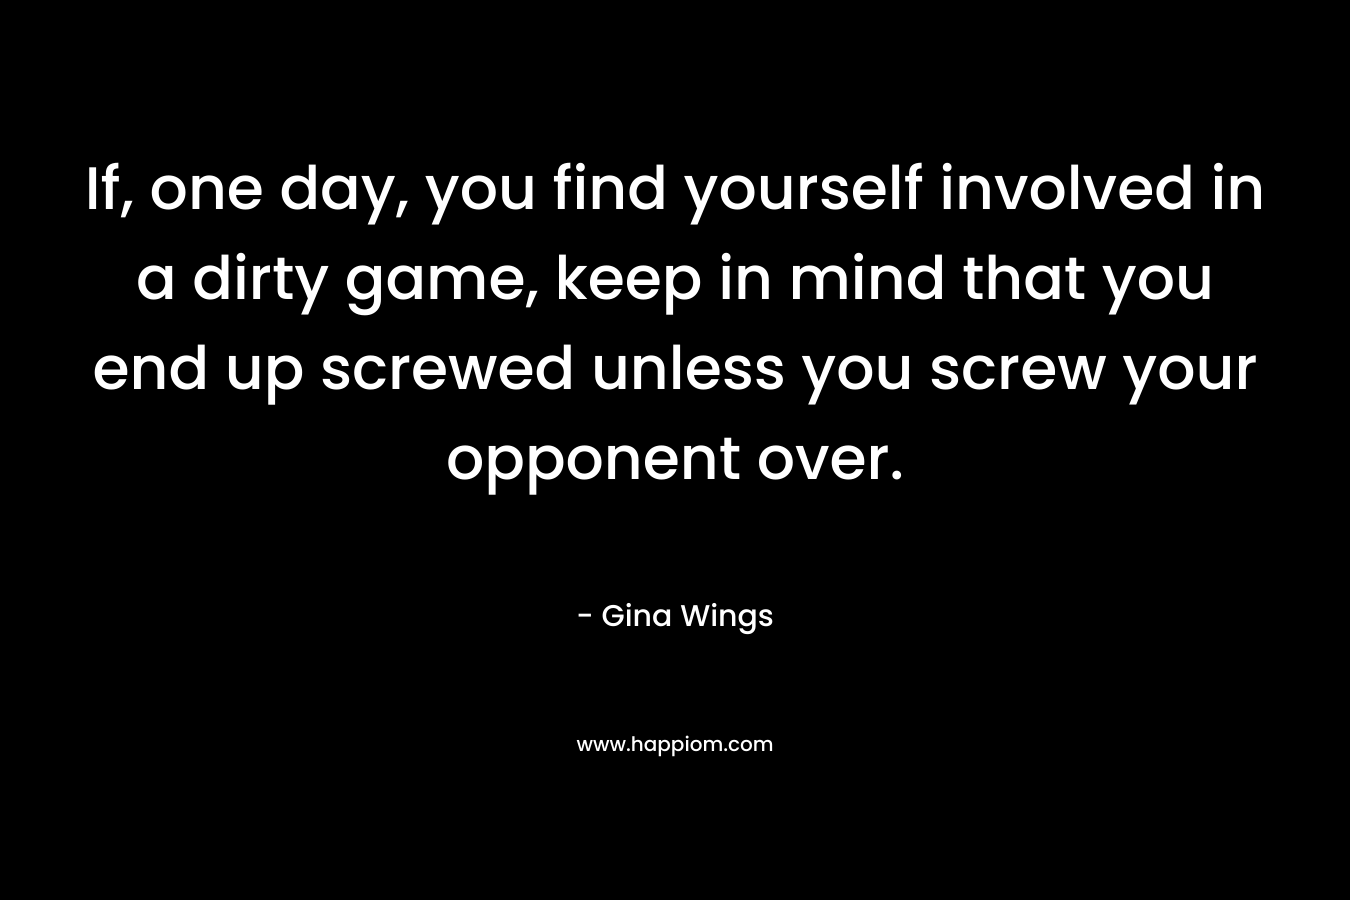 If, one day, you find yourself involved in a dirty game, keep in mind that you end up screwed unless you screw your opponent over.